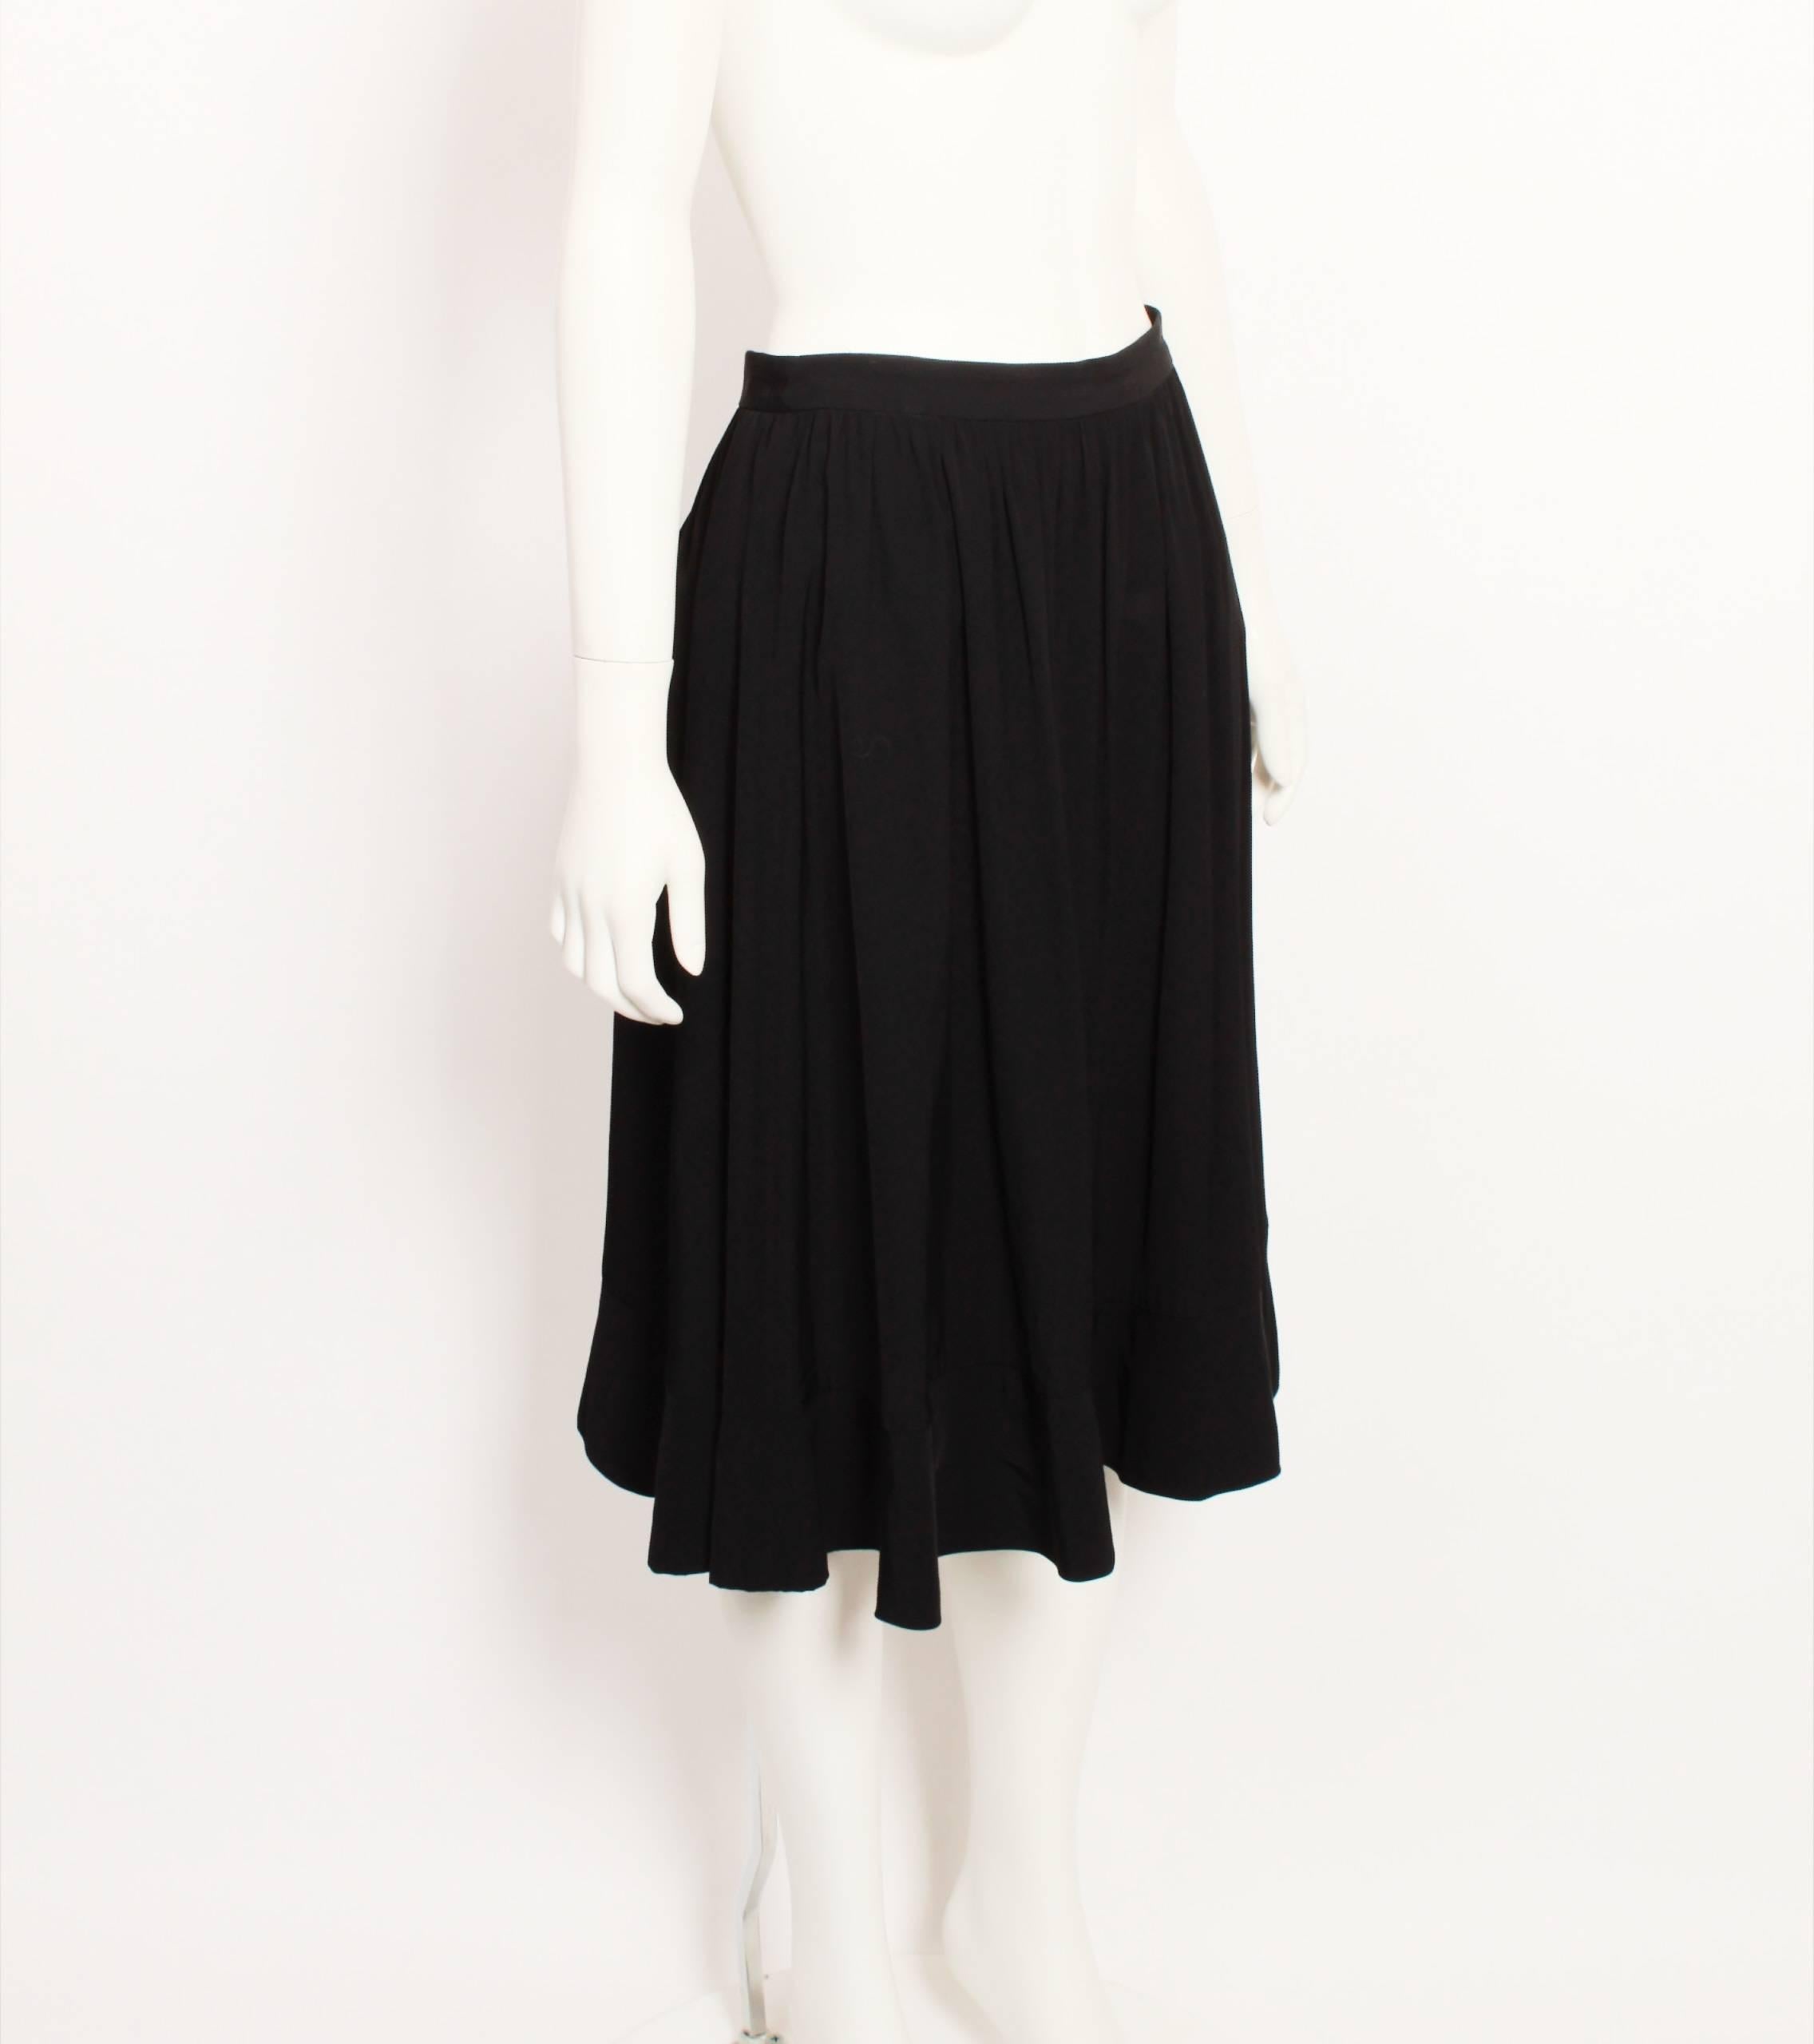 Comme des Garcons Frill Skirt In Good Condition For Sale In Melbourne, Victoria